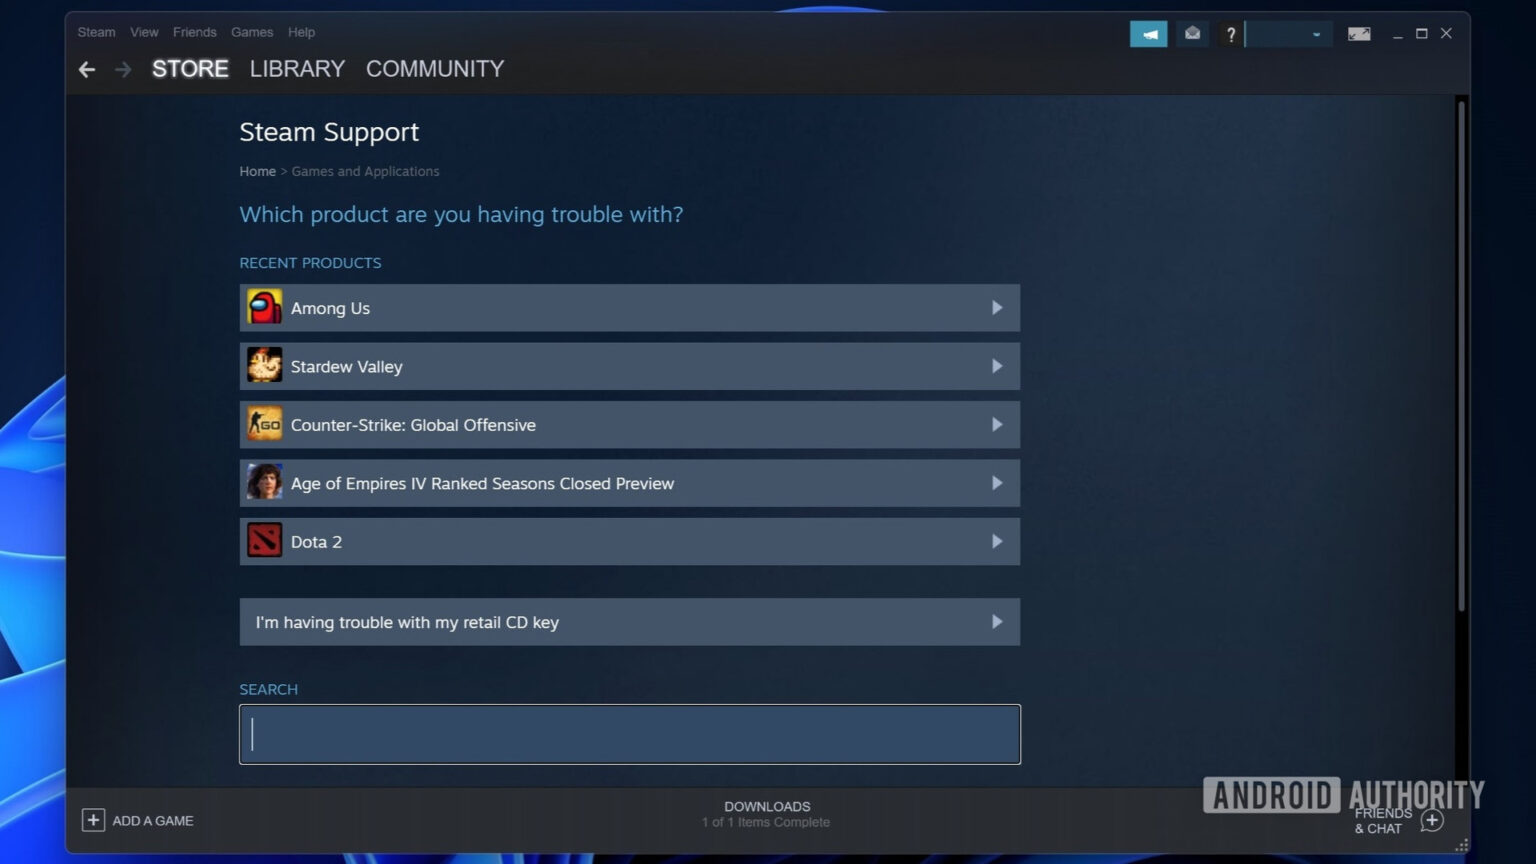 How to fully uninstall games from Steam - Android Authority